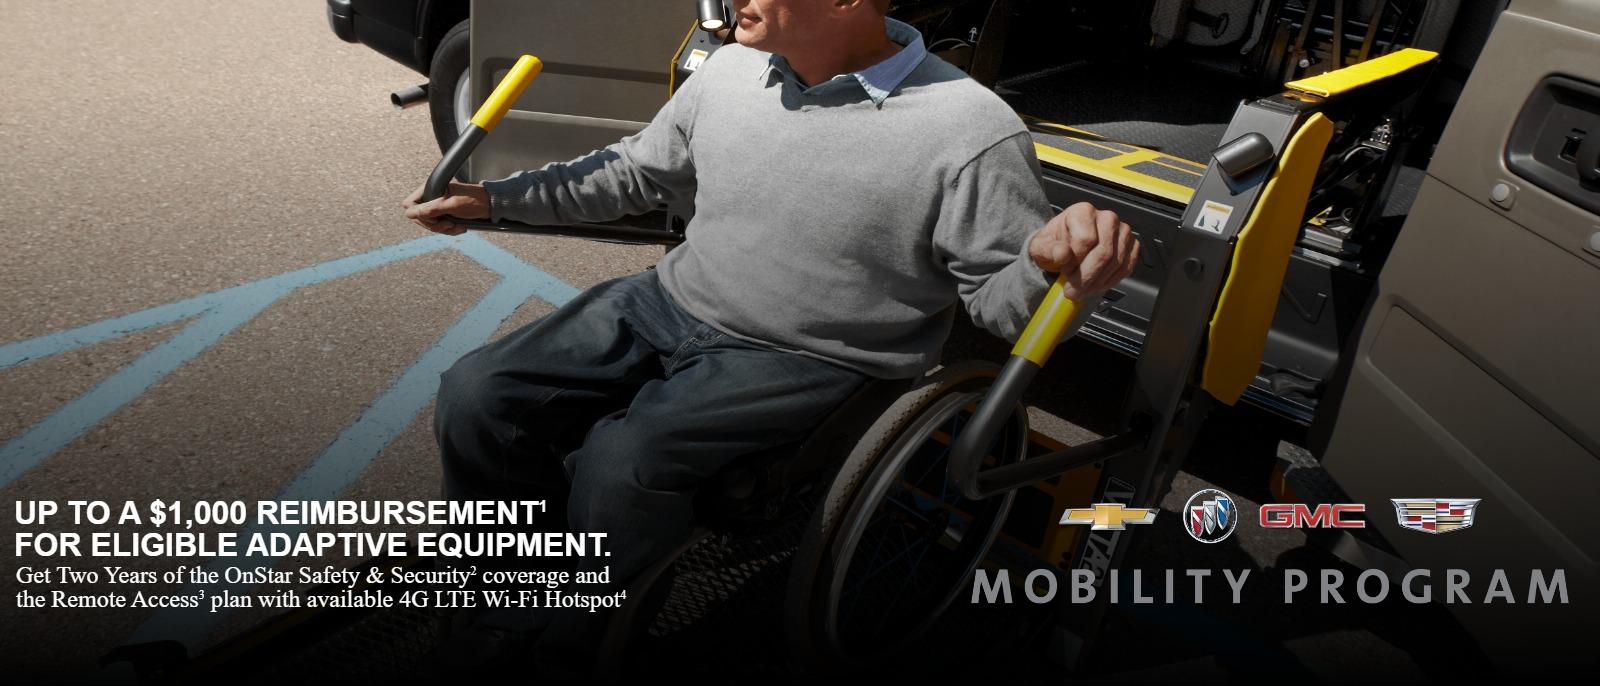 GM Mobility | UP TO A $1,000 REIMBURSEMENT1 FOR ELIGIBLE ADAPTIVE EQUIPMENT. | Get Two Years of the OnStar Safety & Security2 coverage and the Remote Access3 plan with available 4G LTE Wi-Fi Hotspot4